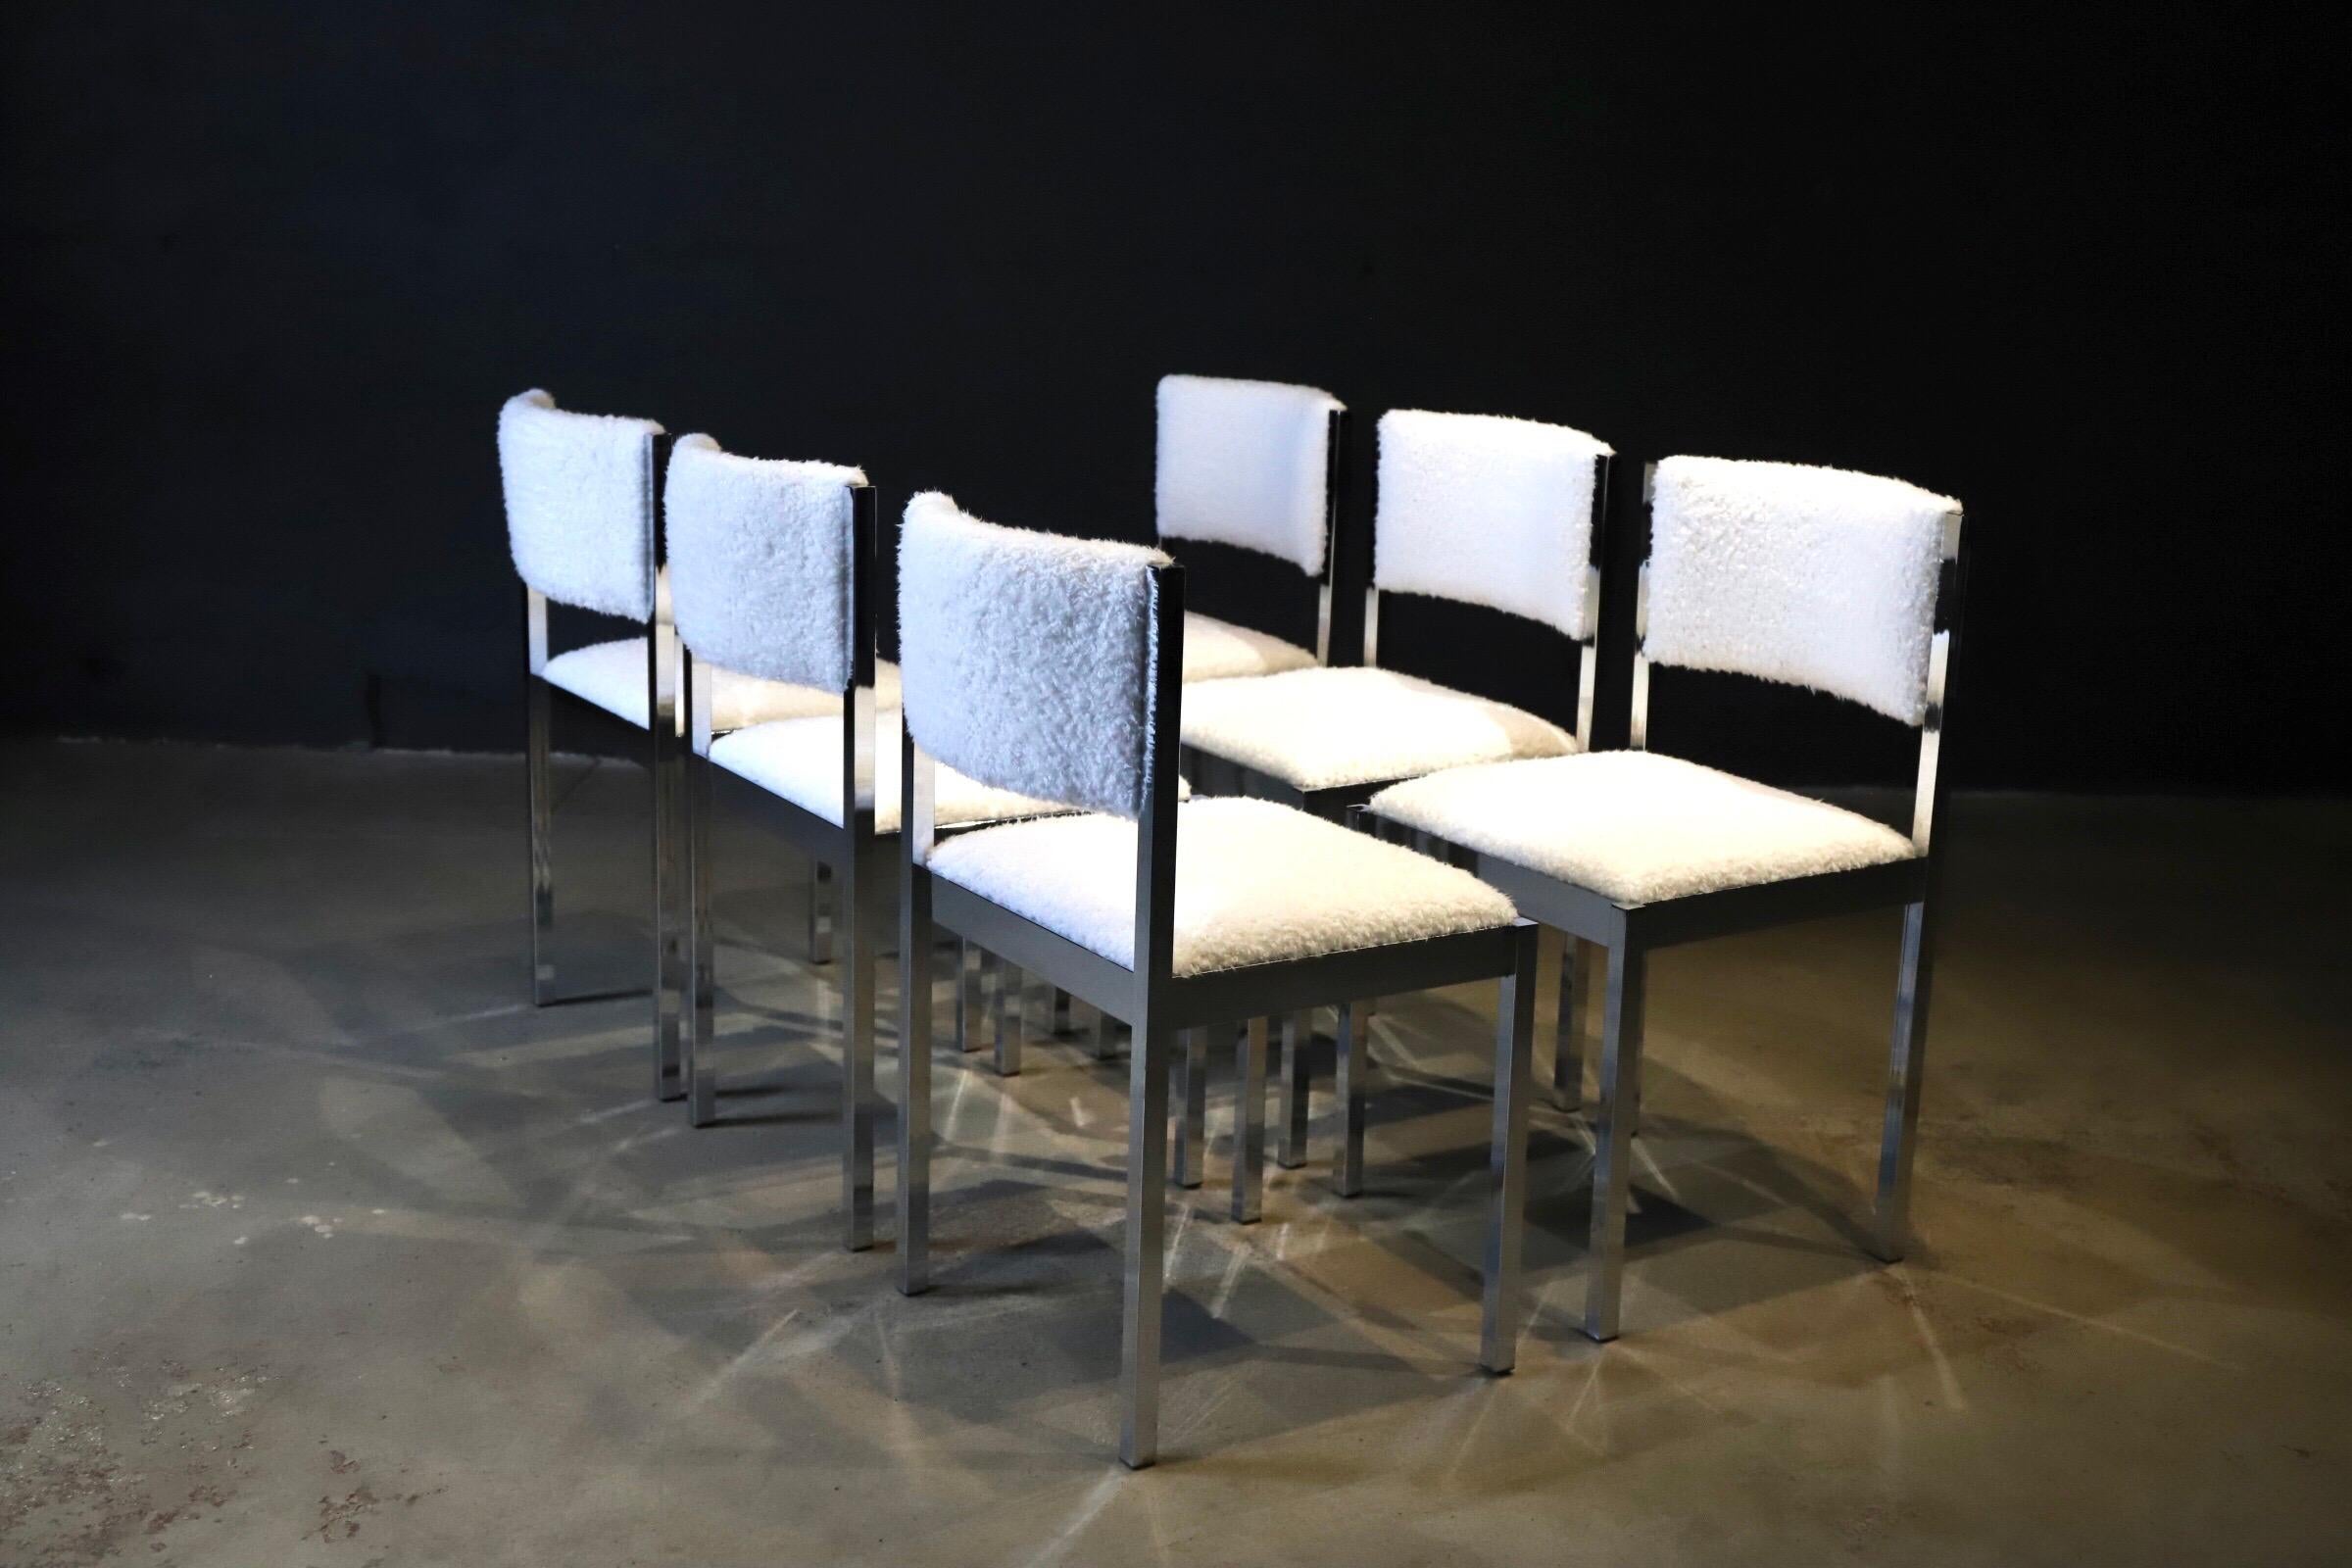 Set of six (6) chrome dining chairs by Daystrom with fresh, new faux sheepskin upholstery. A fluffy curved back and seat makes these chairs incredibly comfortable. Sure to make a statement in any dining room. Pictured with spider leg wood and glass